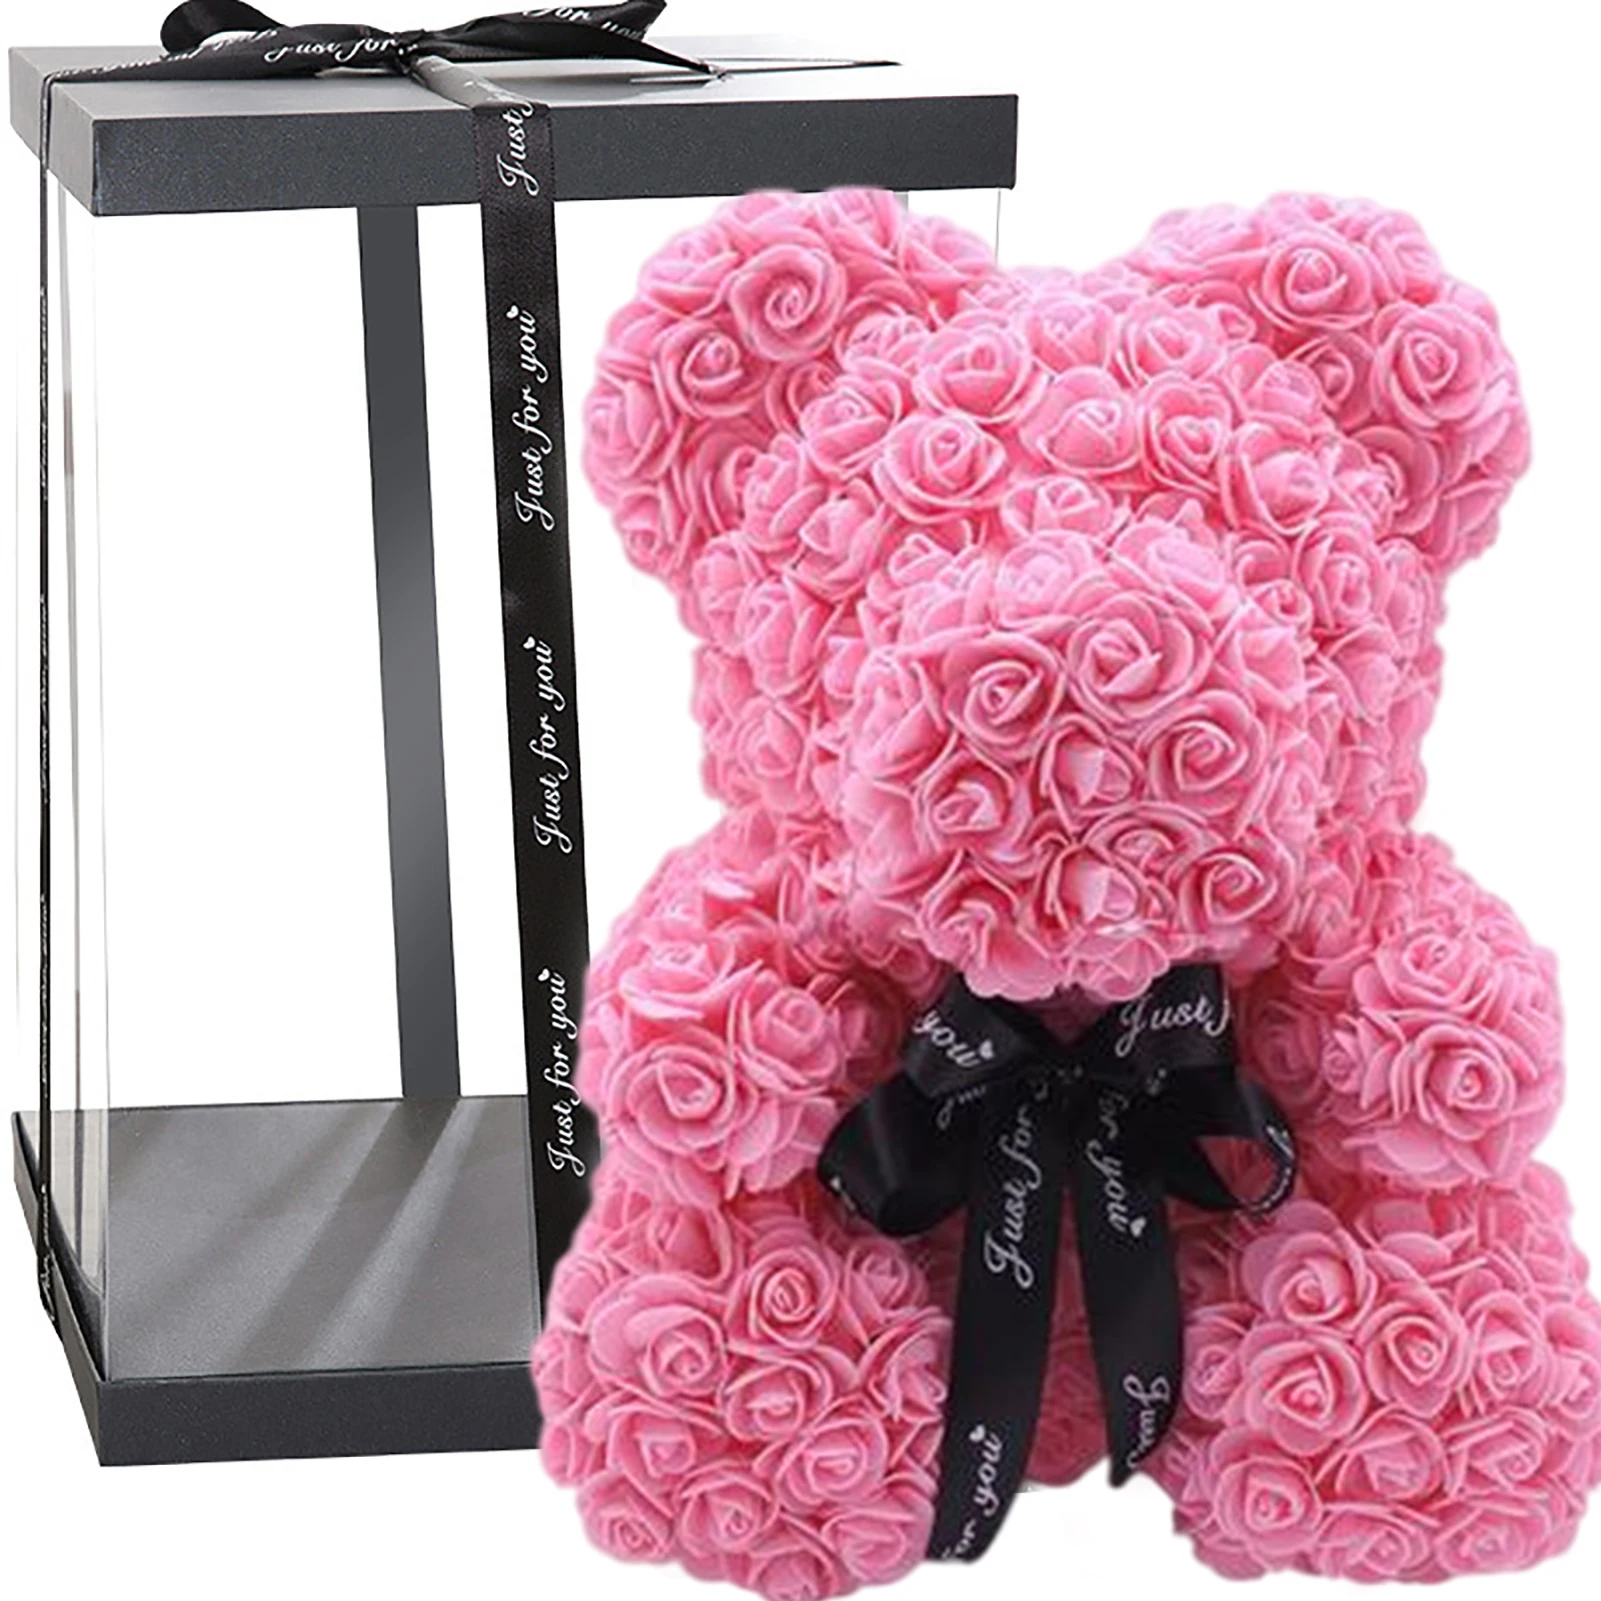 

25cm Teddy Bear Rose With Gift Box Artificial PE Flower Bear Rose Valentine's Day For Girlfriend Women Wife Mother's Day Gifts